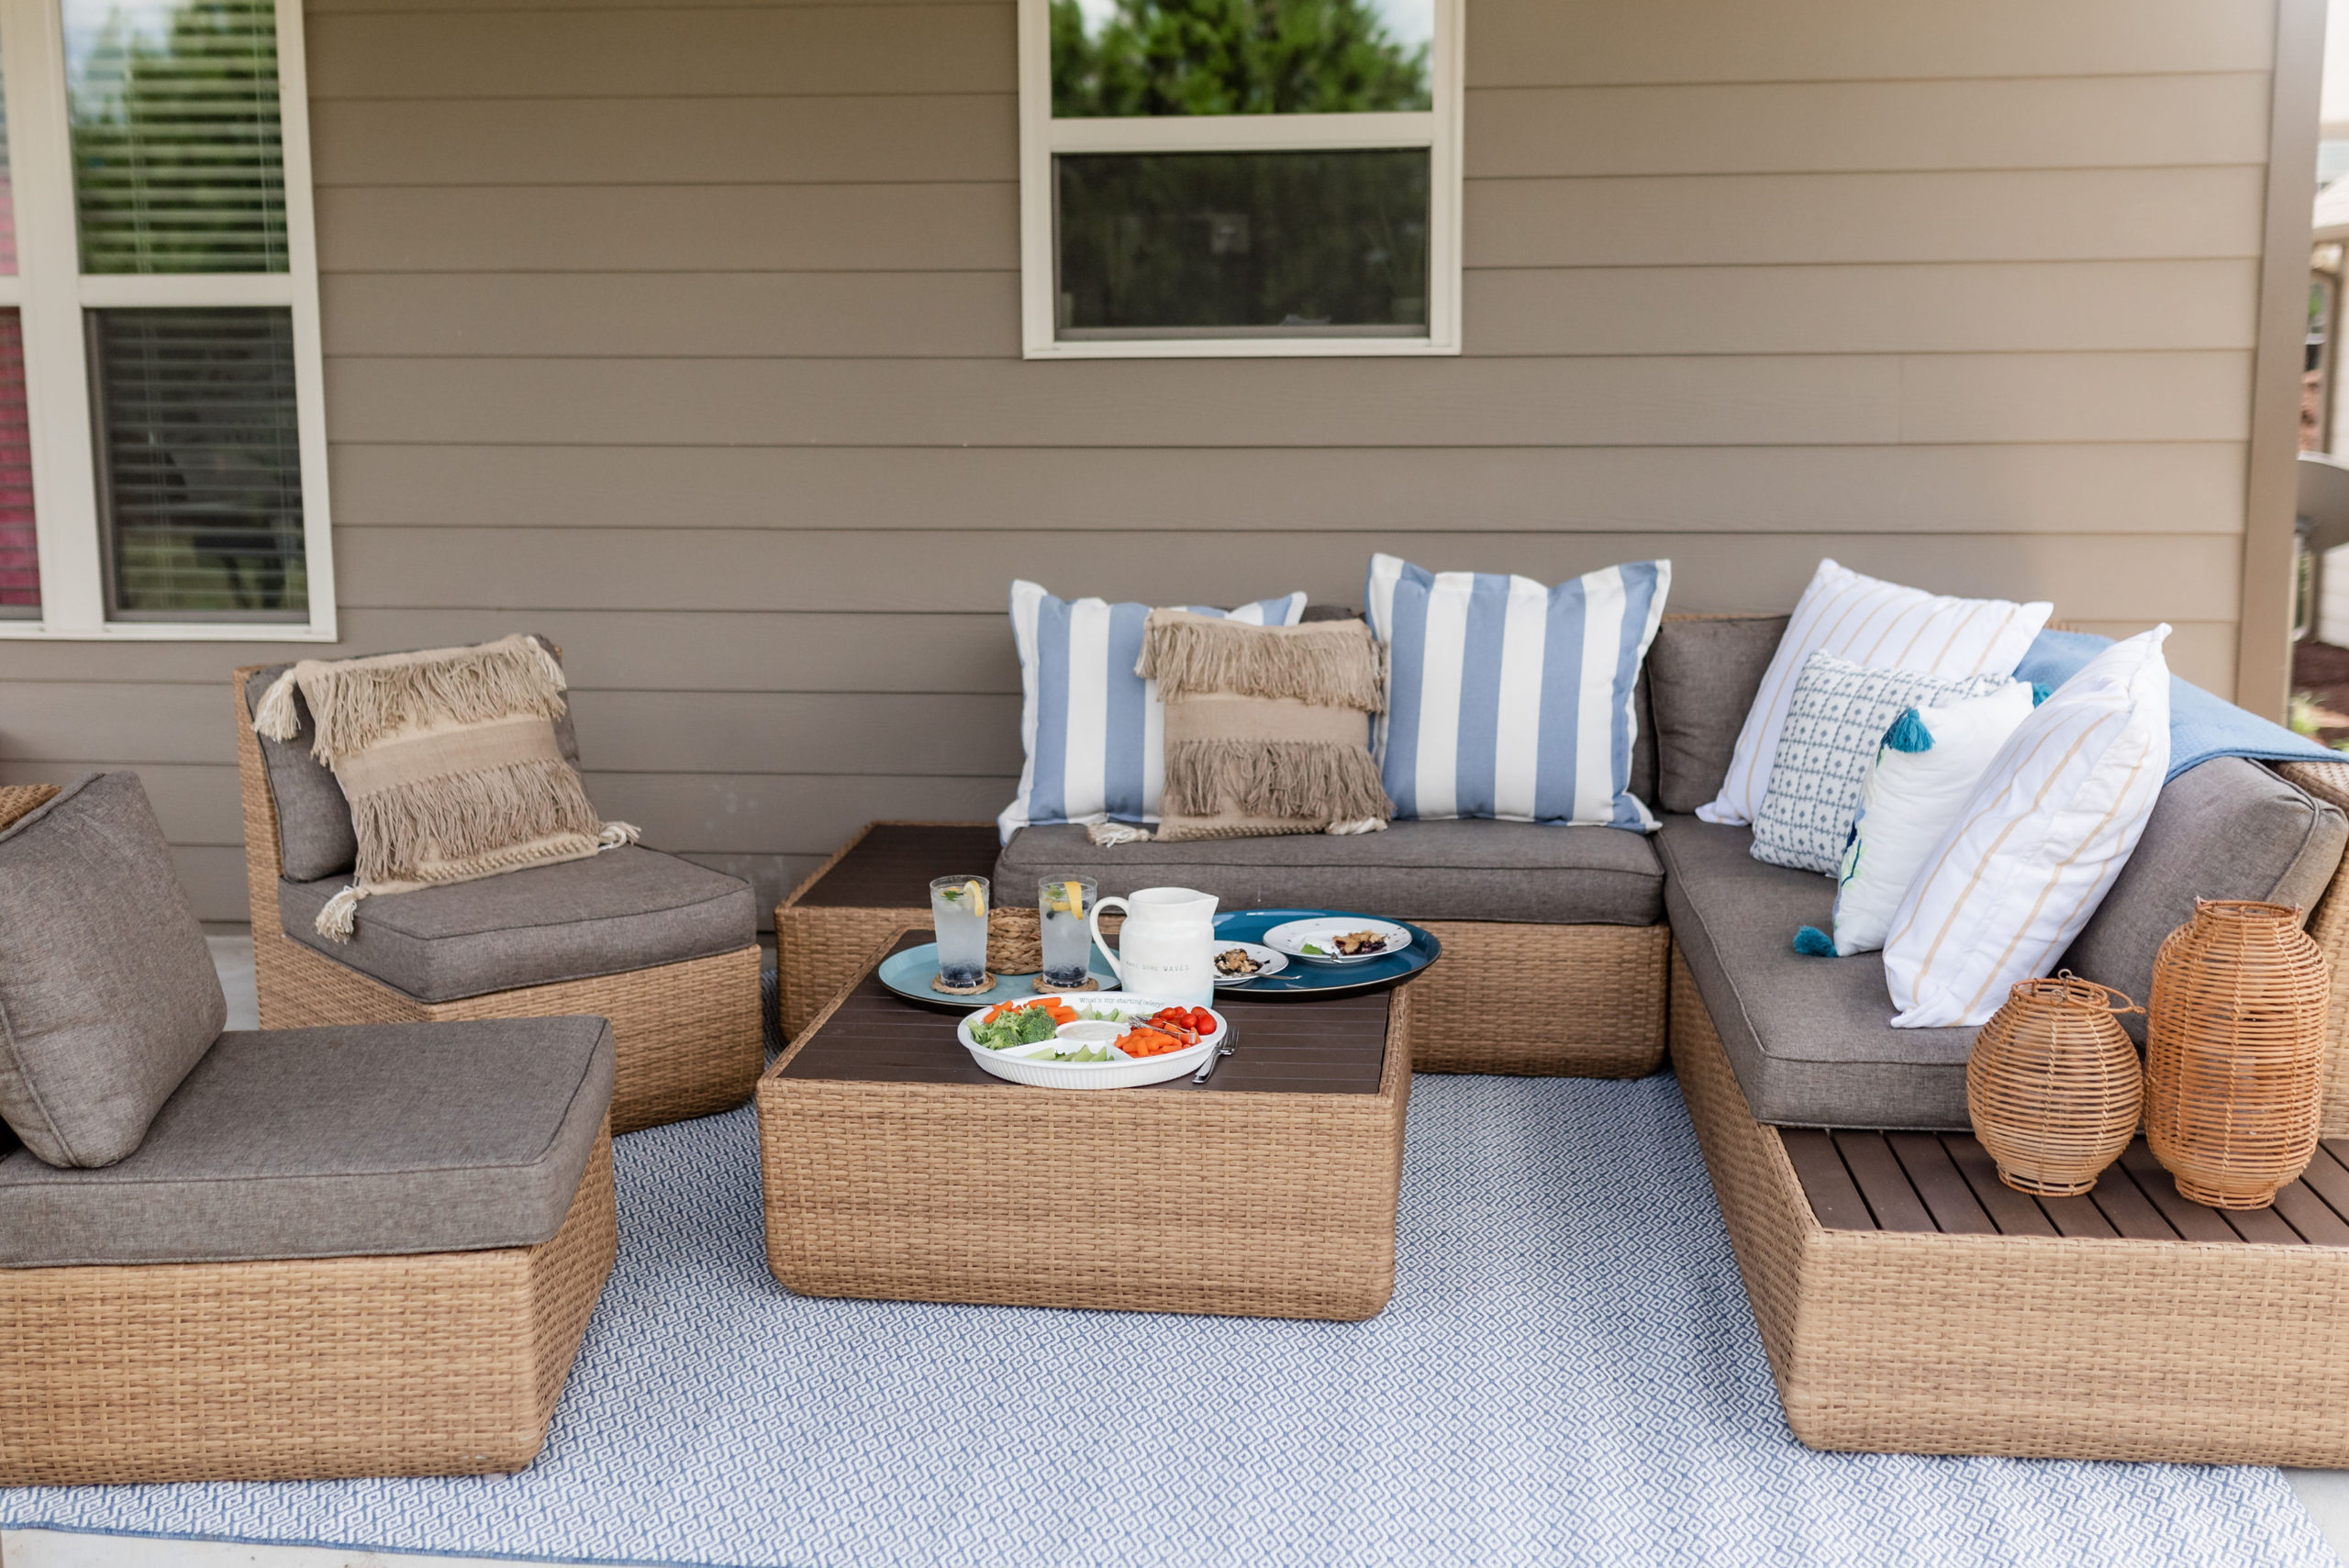 Outdoor Living Space with Mudpie